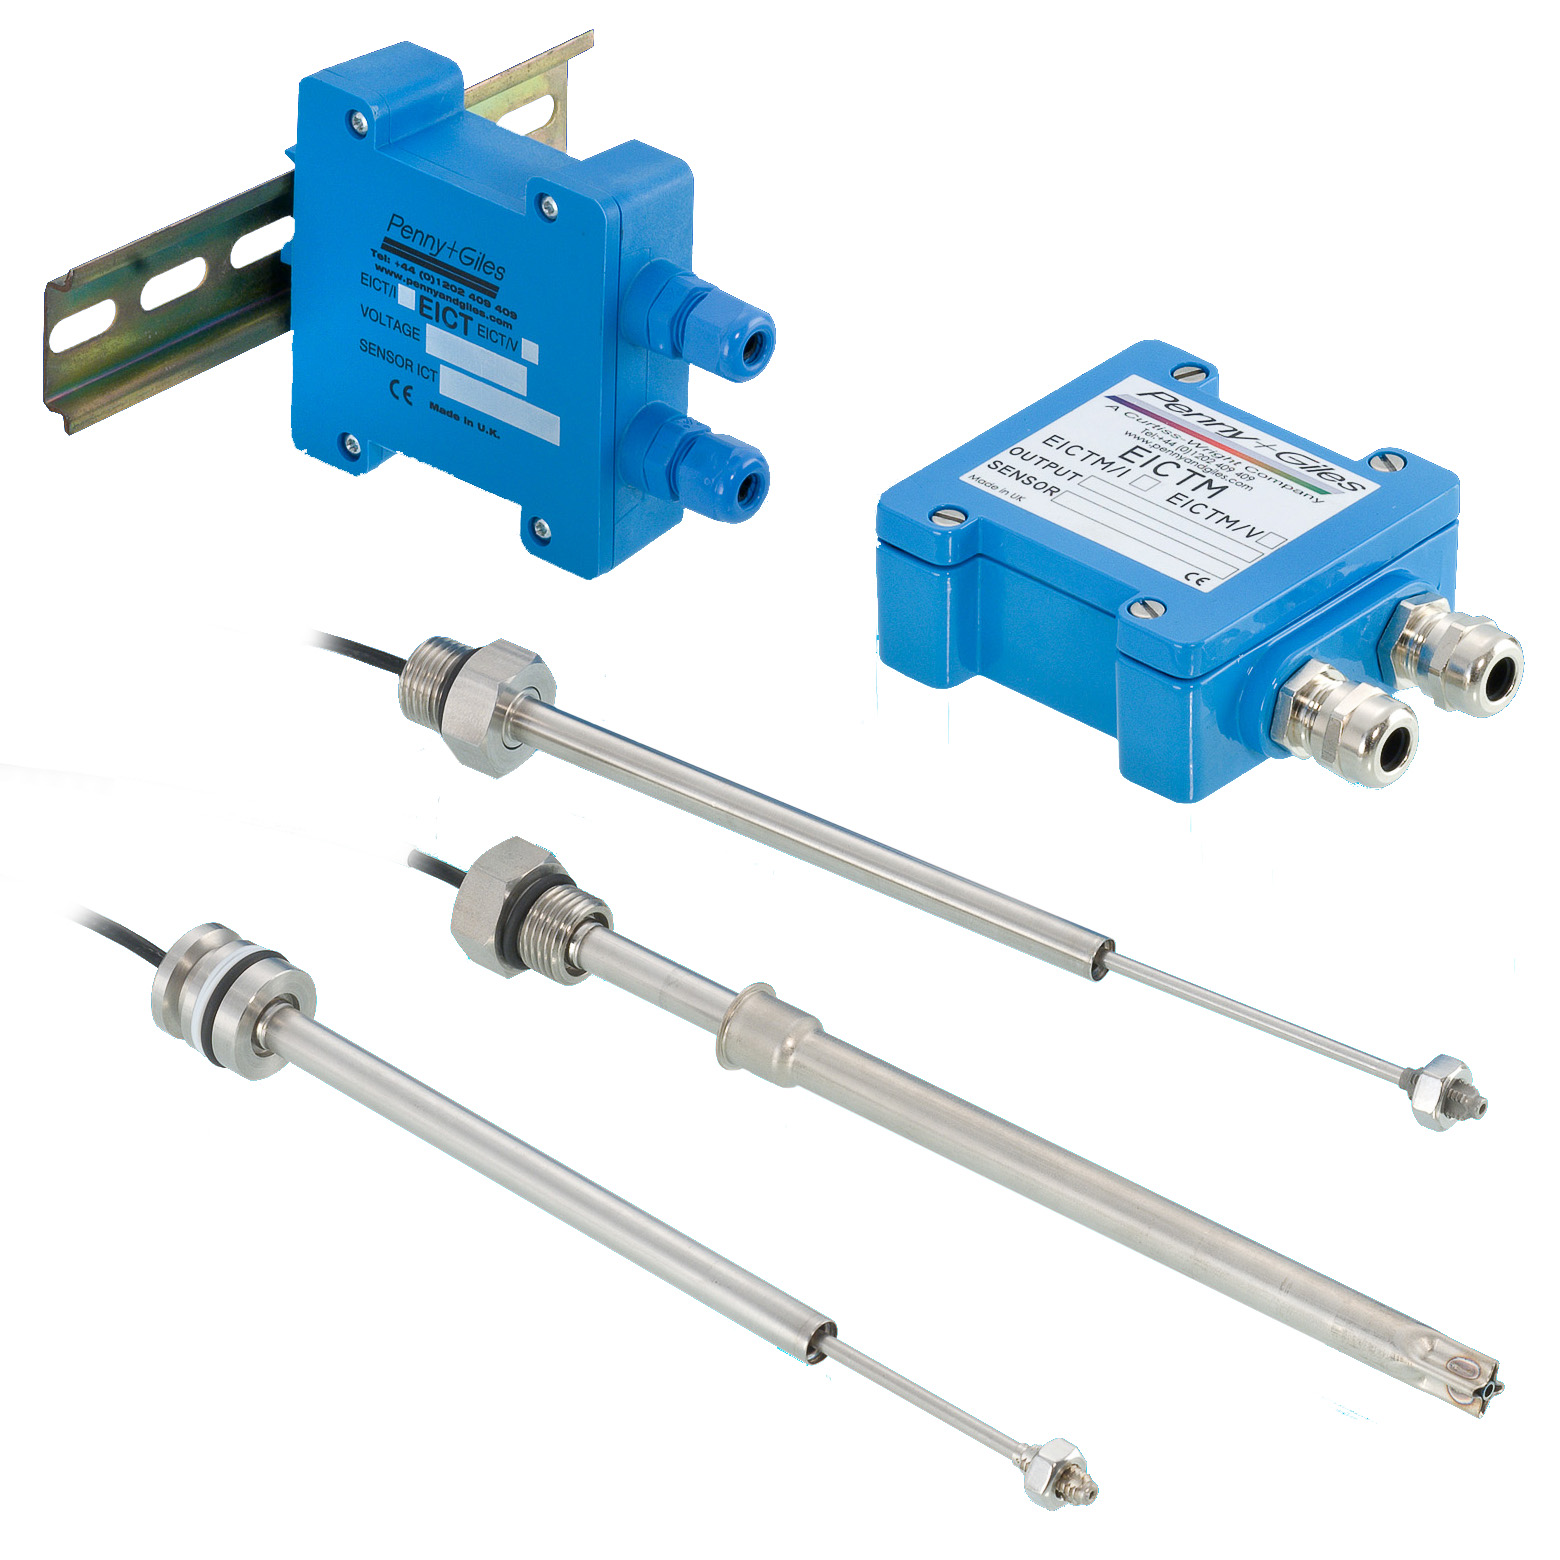 ICT080 - Contactless In-Cylinder Linear Transducer